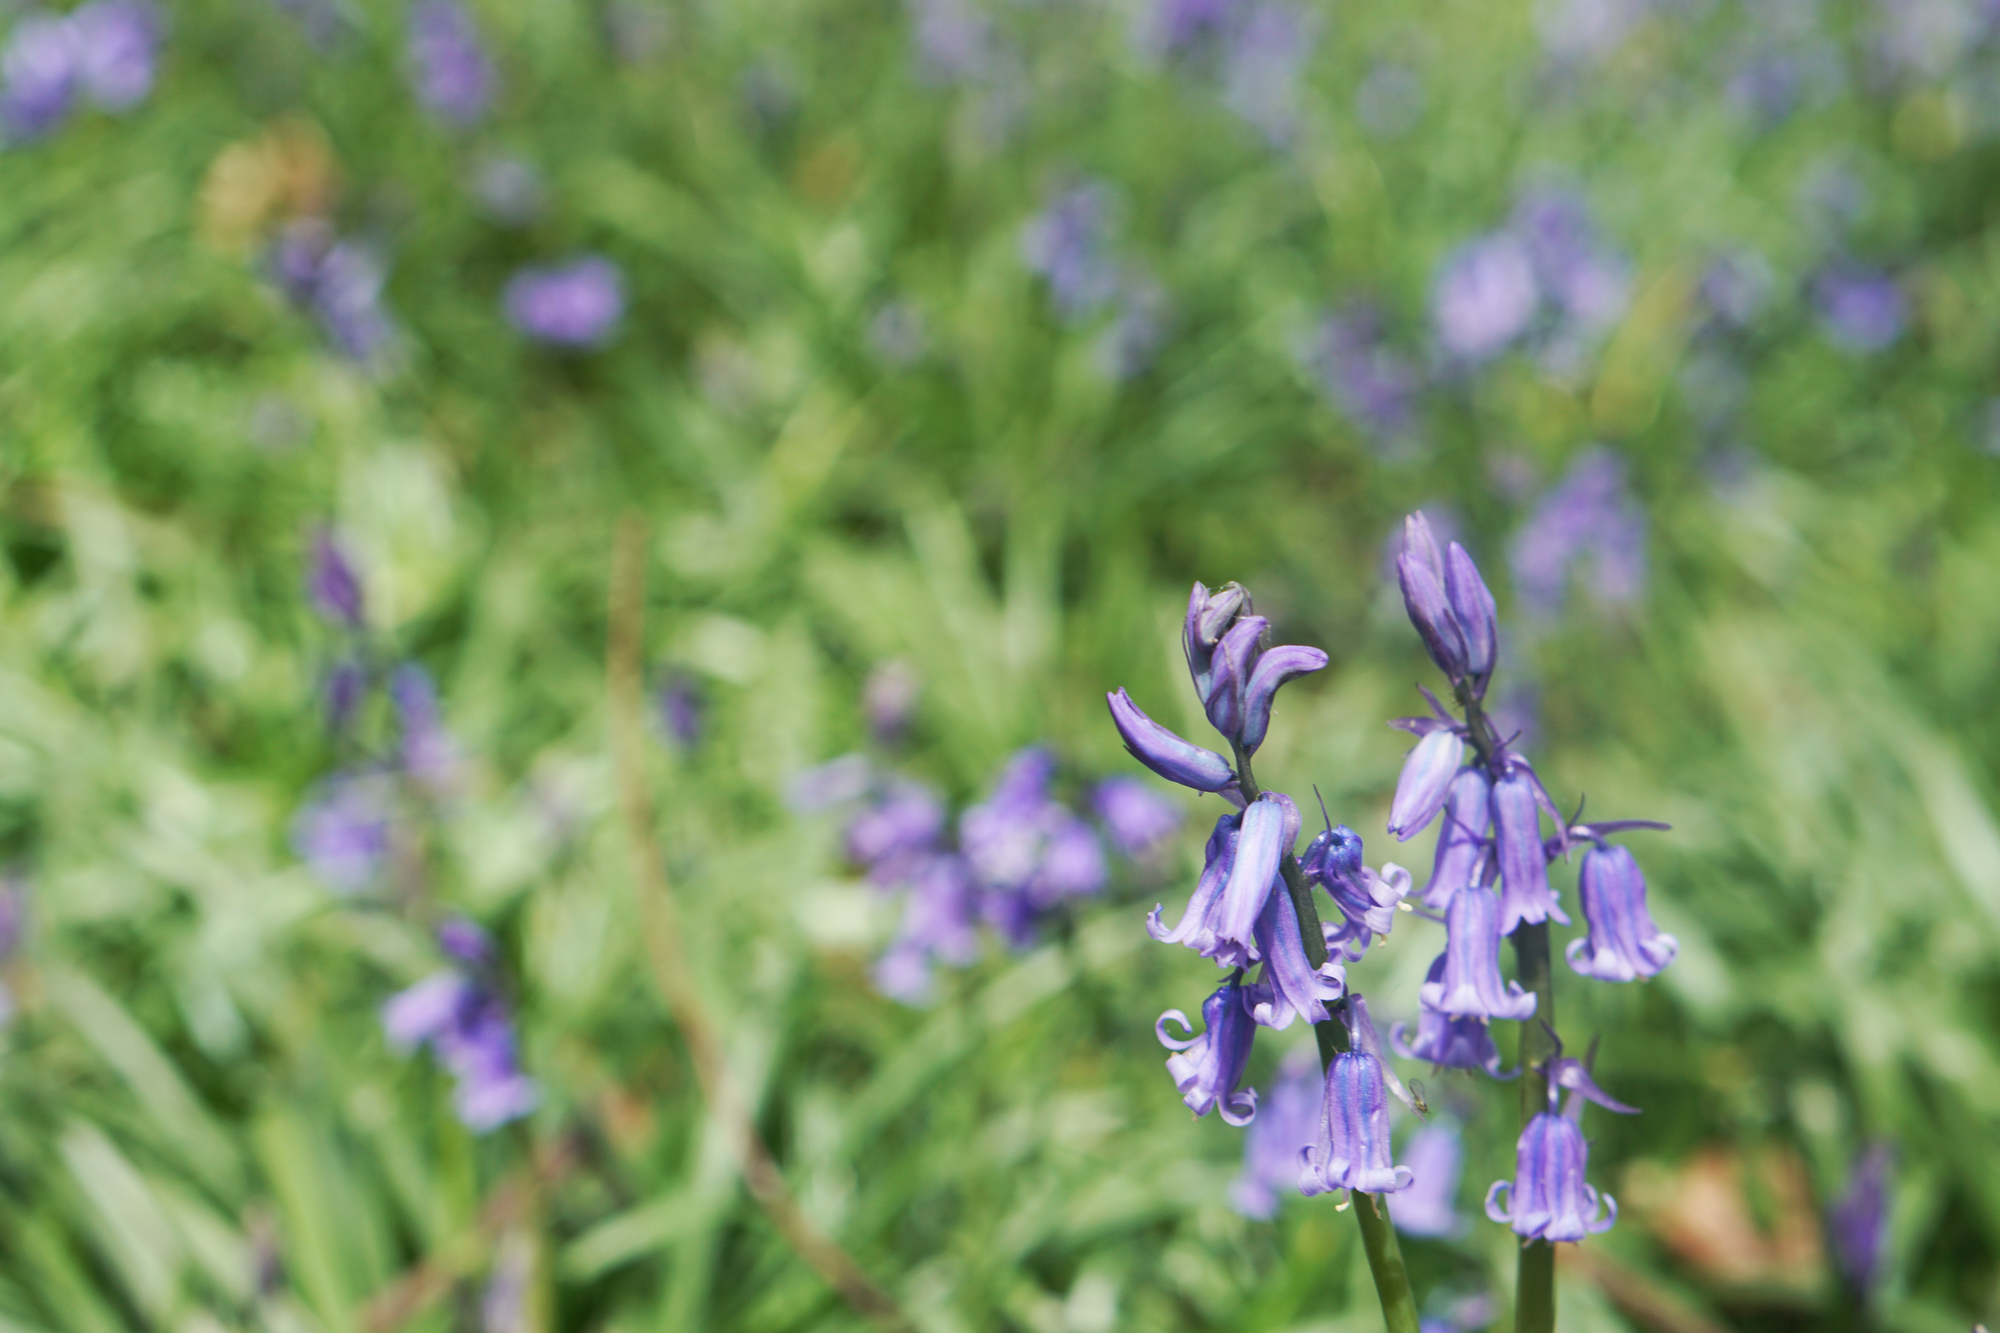 Two bluebell heads in focus close to the camera with a defocused field of them behind.